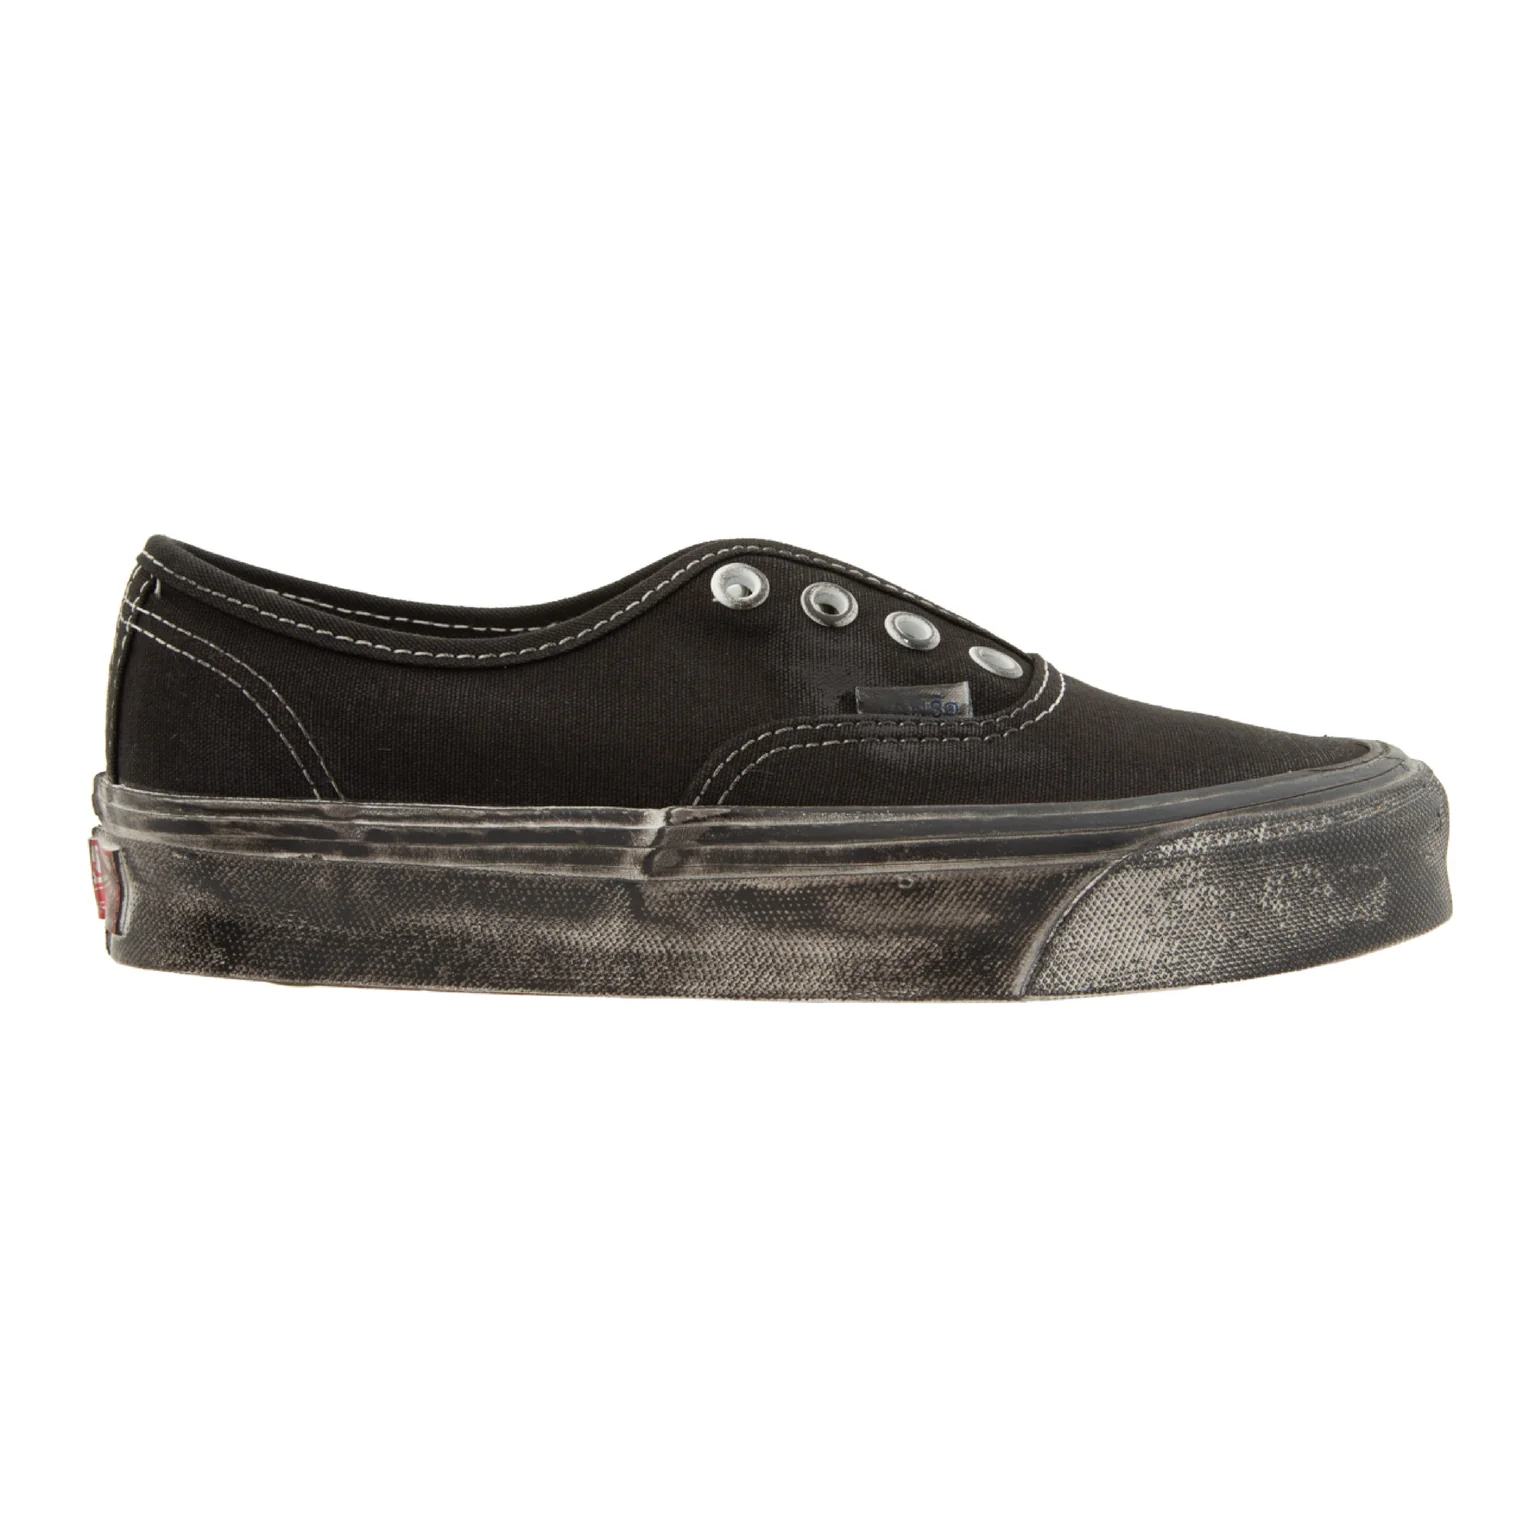 Primary image for new men's 8.5 VANS OG AUTHENTIC LX distressed look black/white VN0A5FBDBA21